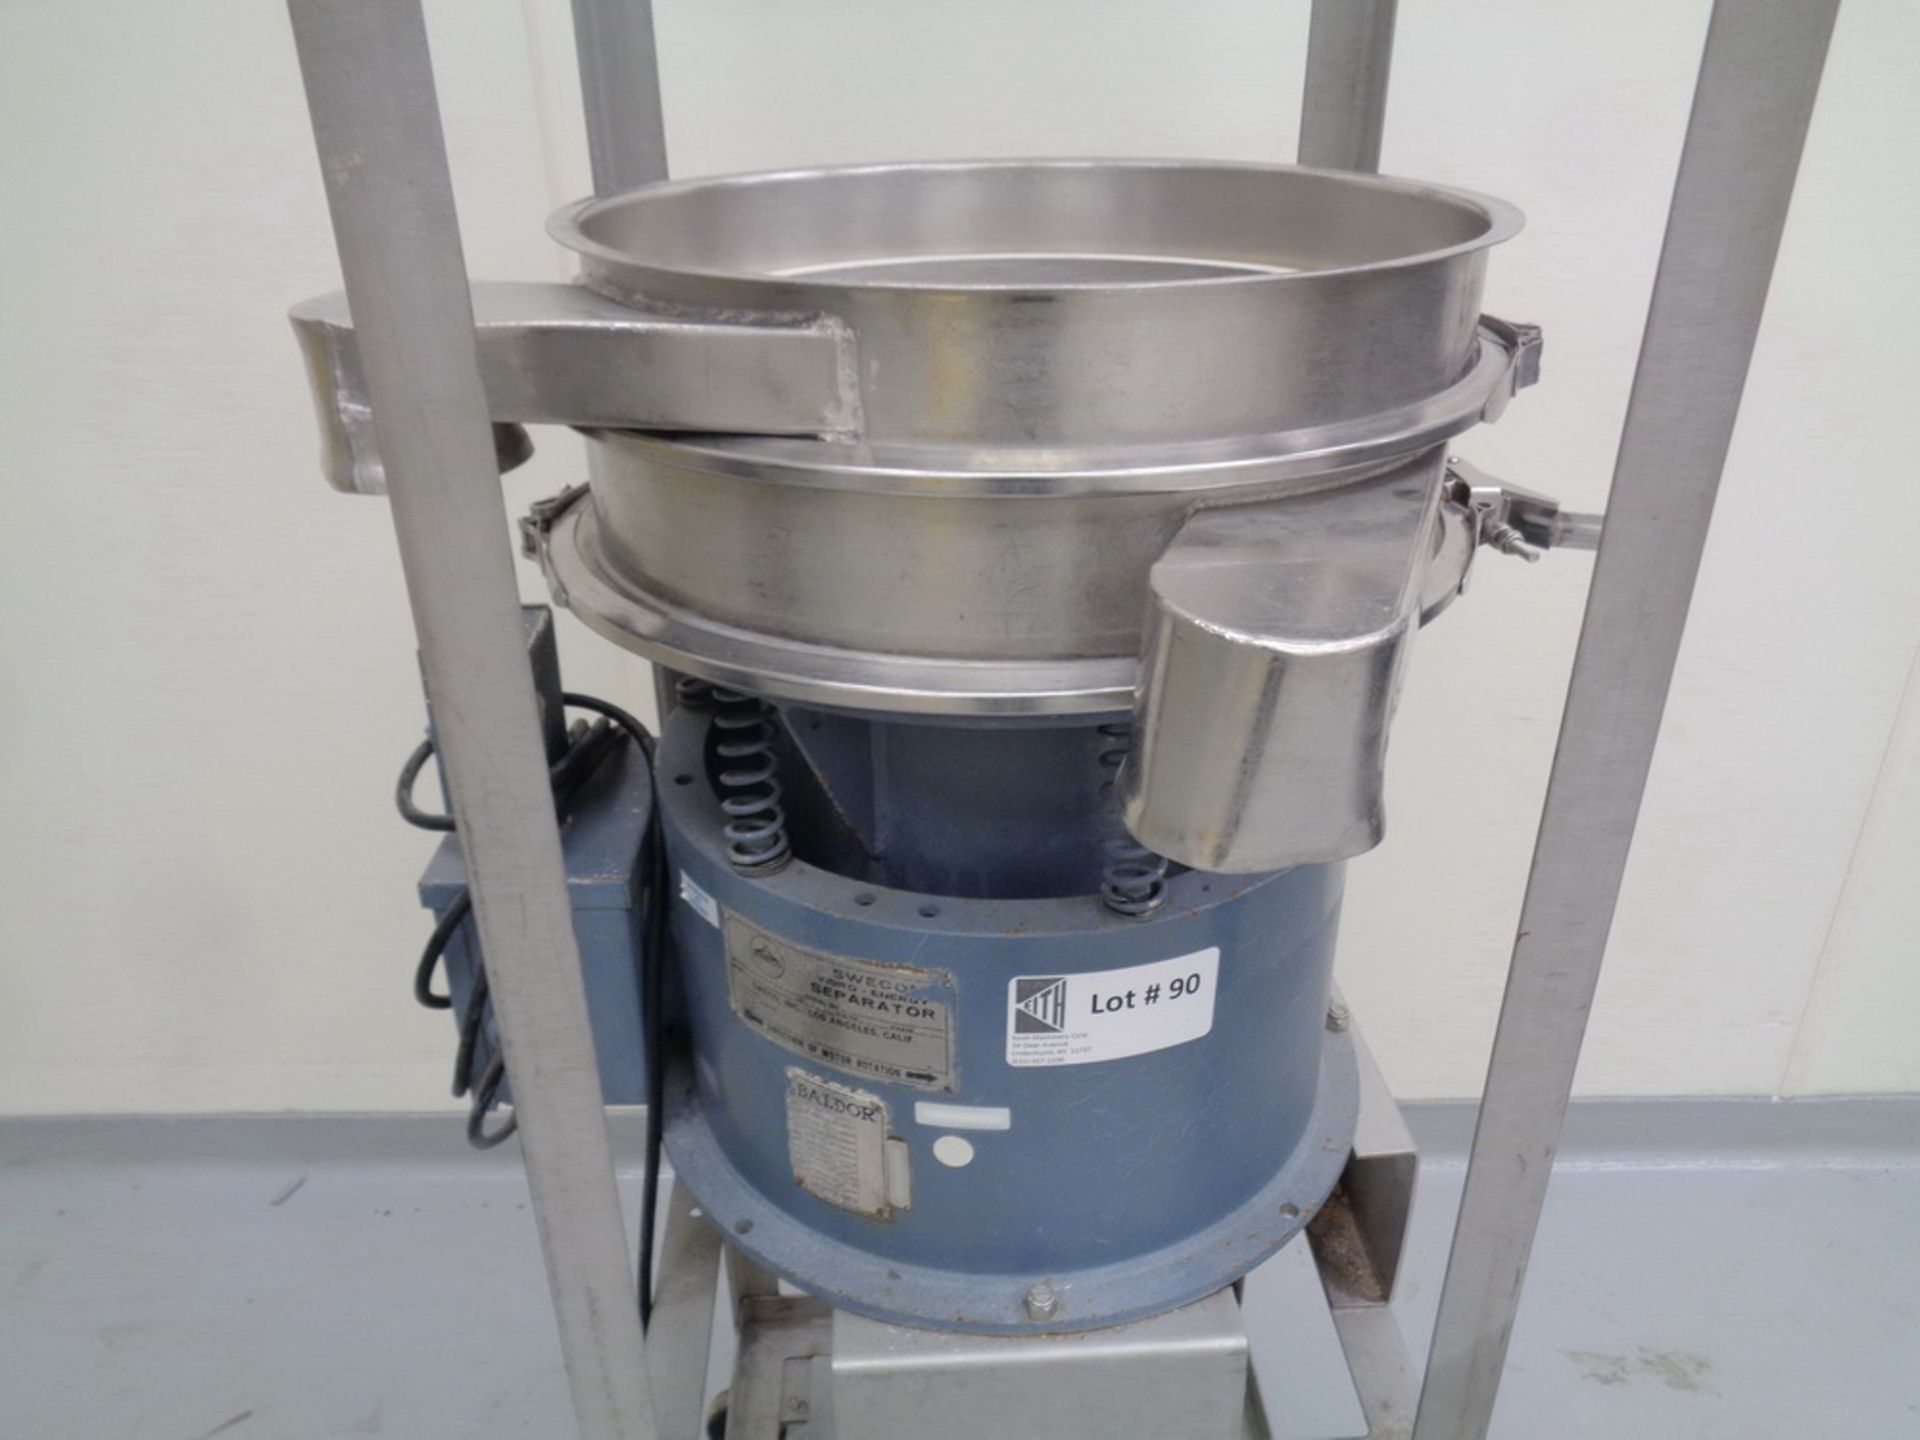 Sweco 18" Double Deck Stainless Steel Sifter, Model LS18S333, S/N LS18-275-37 - Image 2 of 6